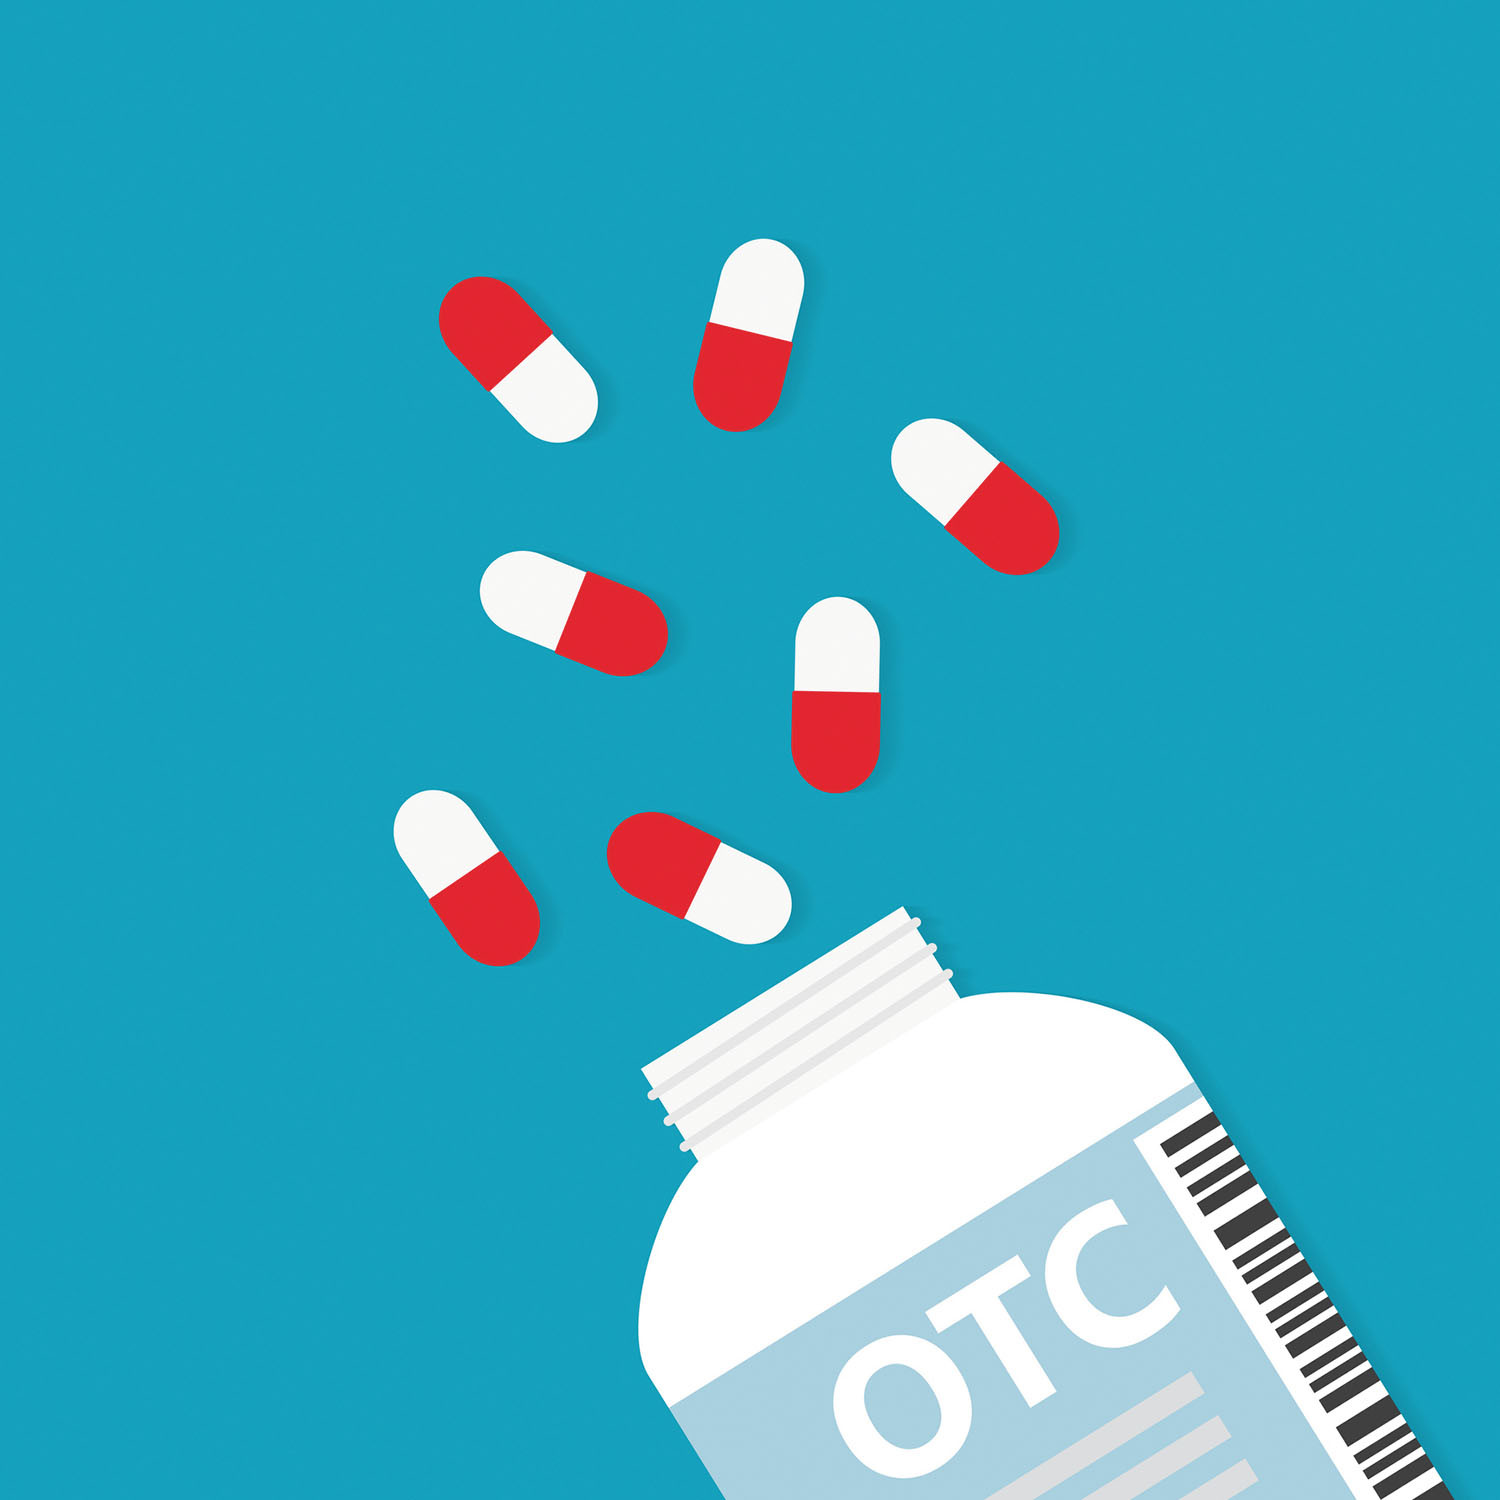 illustration of a pill bottle labeled OTC with seven red and white pills spilling out of it